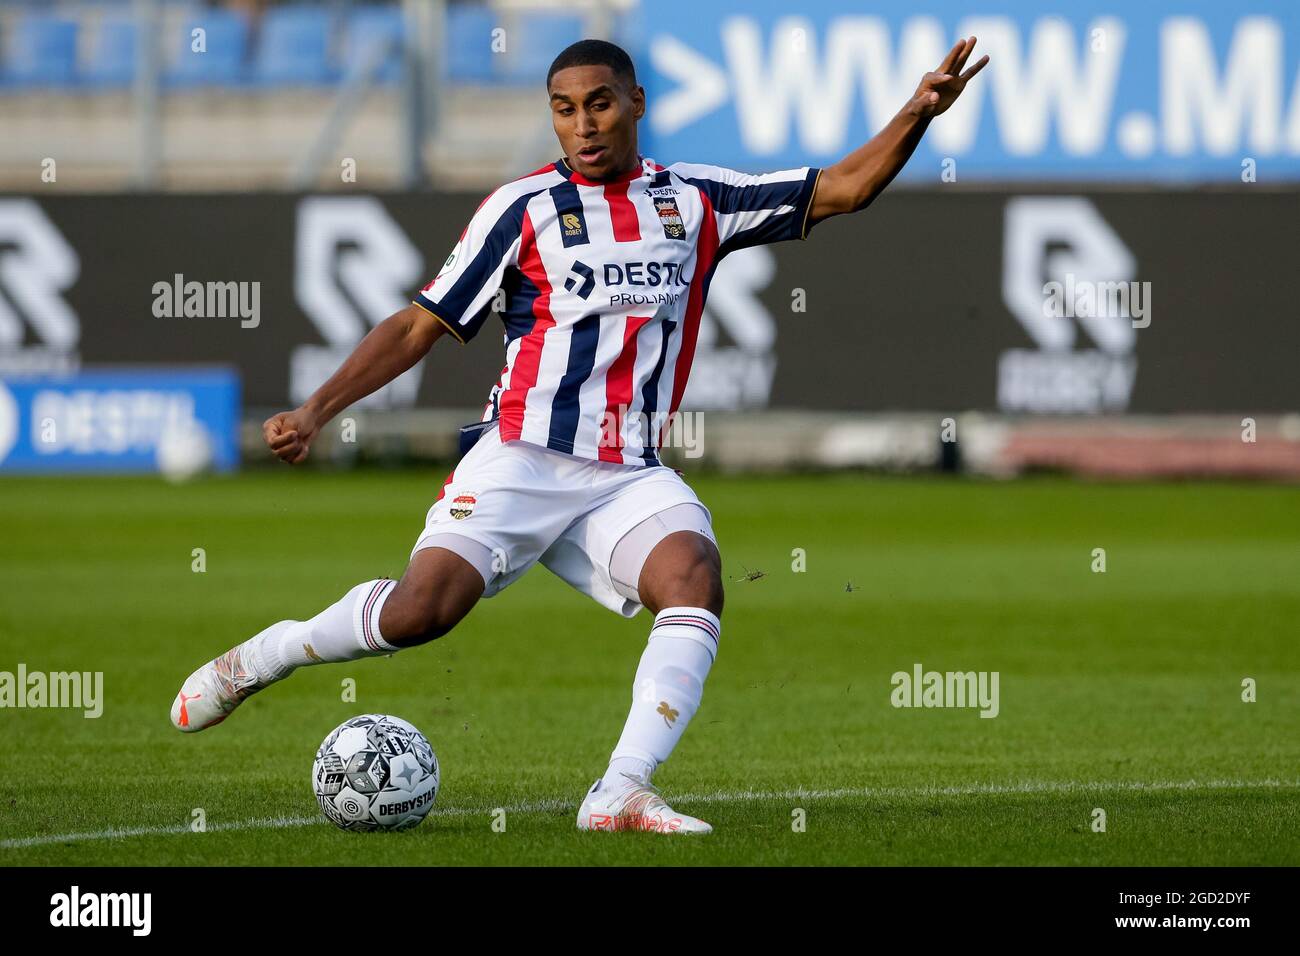 TILBURG, NETHERLANDS - AUGUST 10: Driess Saddiki of Willem II during the Pre-season Friendly match between Willem II and Royal Excelsior Virton at the Koning Willem II Stadion on August 10, 2021 in Tilburg, Netherlands (Photo by Broer van den Boom/Orange Pictures) Stock Photo